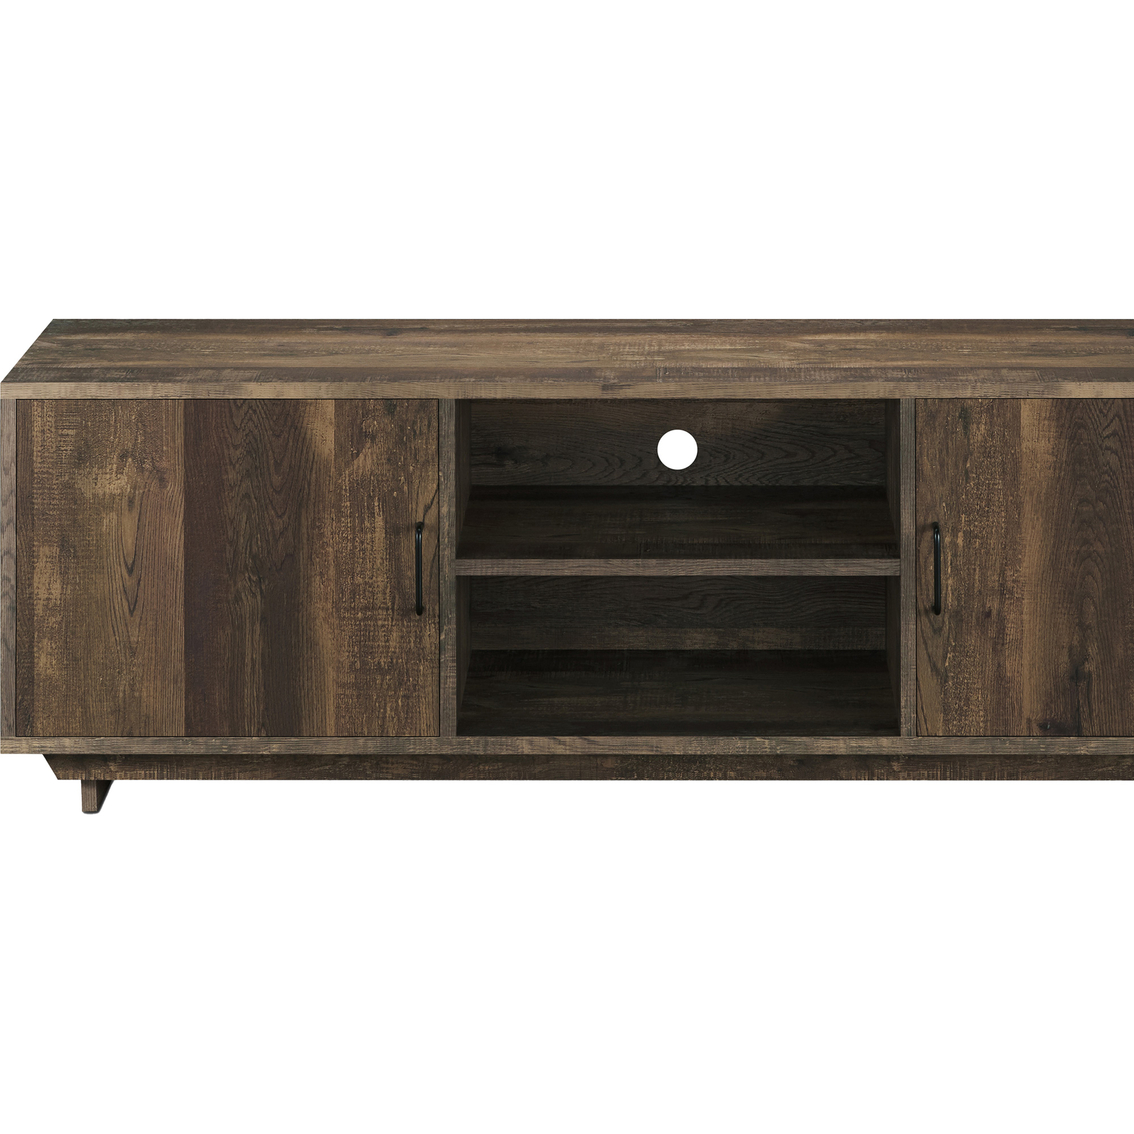 Furniture of America Krella 62 in. TV Stand - Image 2 of 2